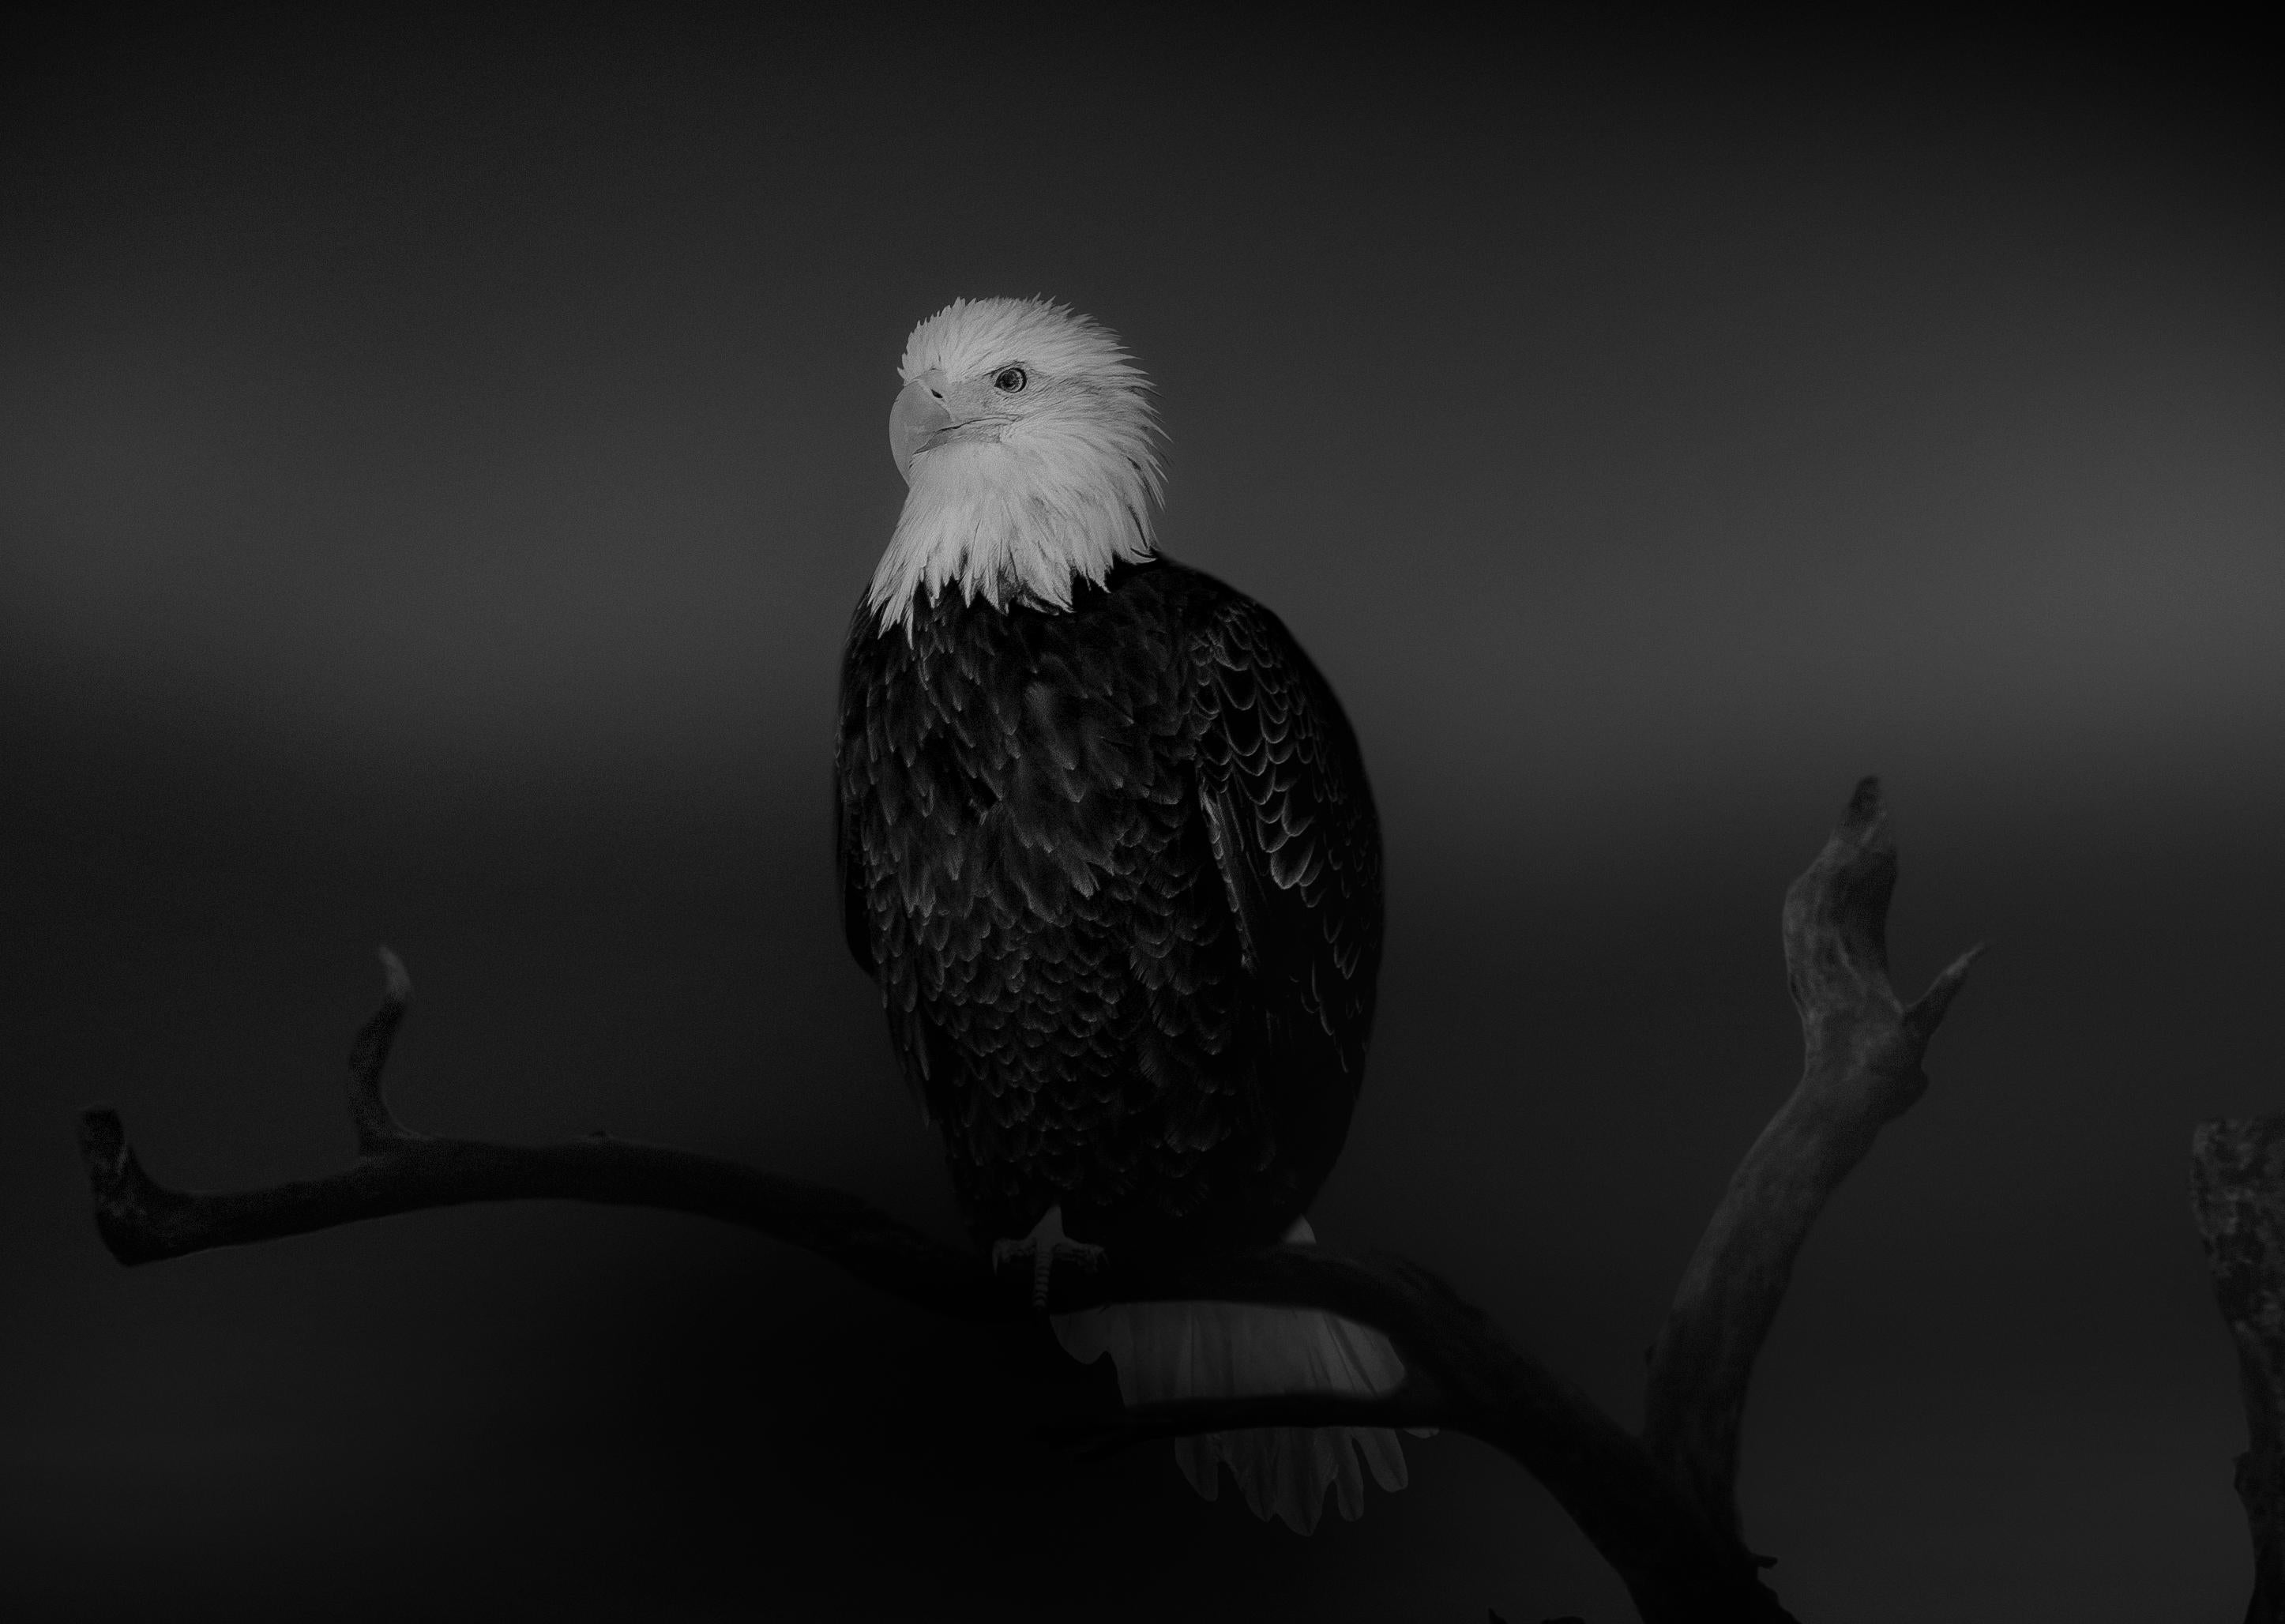 Shane Russeck Animal Print - "Bald Eagle" 50x60 - Black & White Photography, Photograph Unsigned Test Print